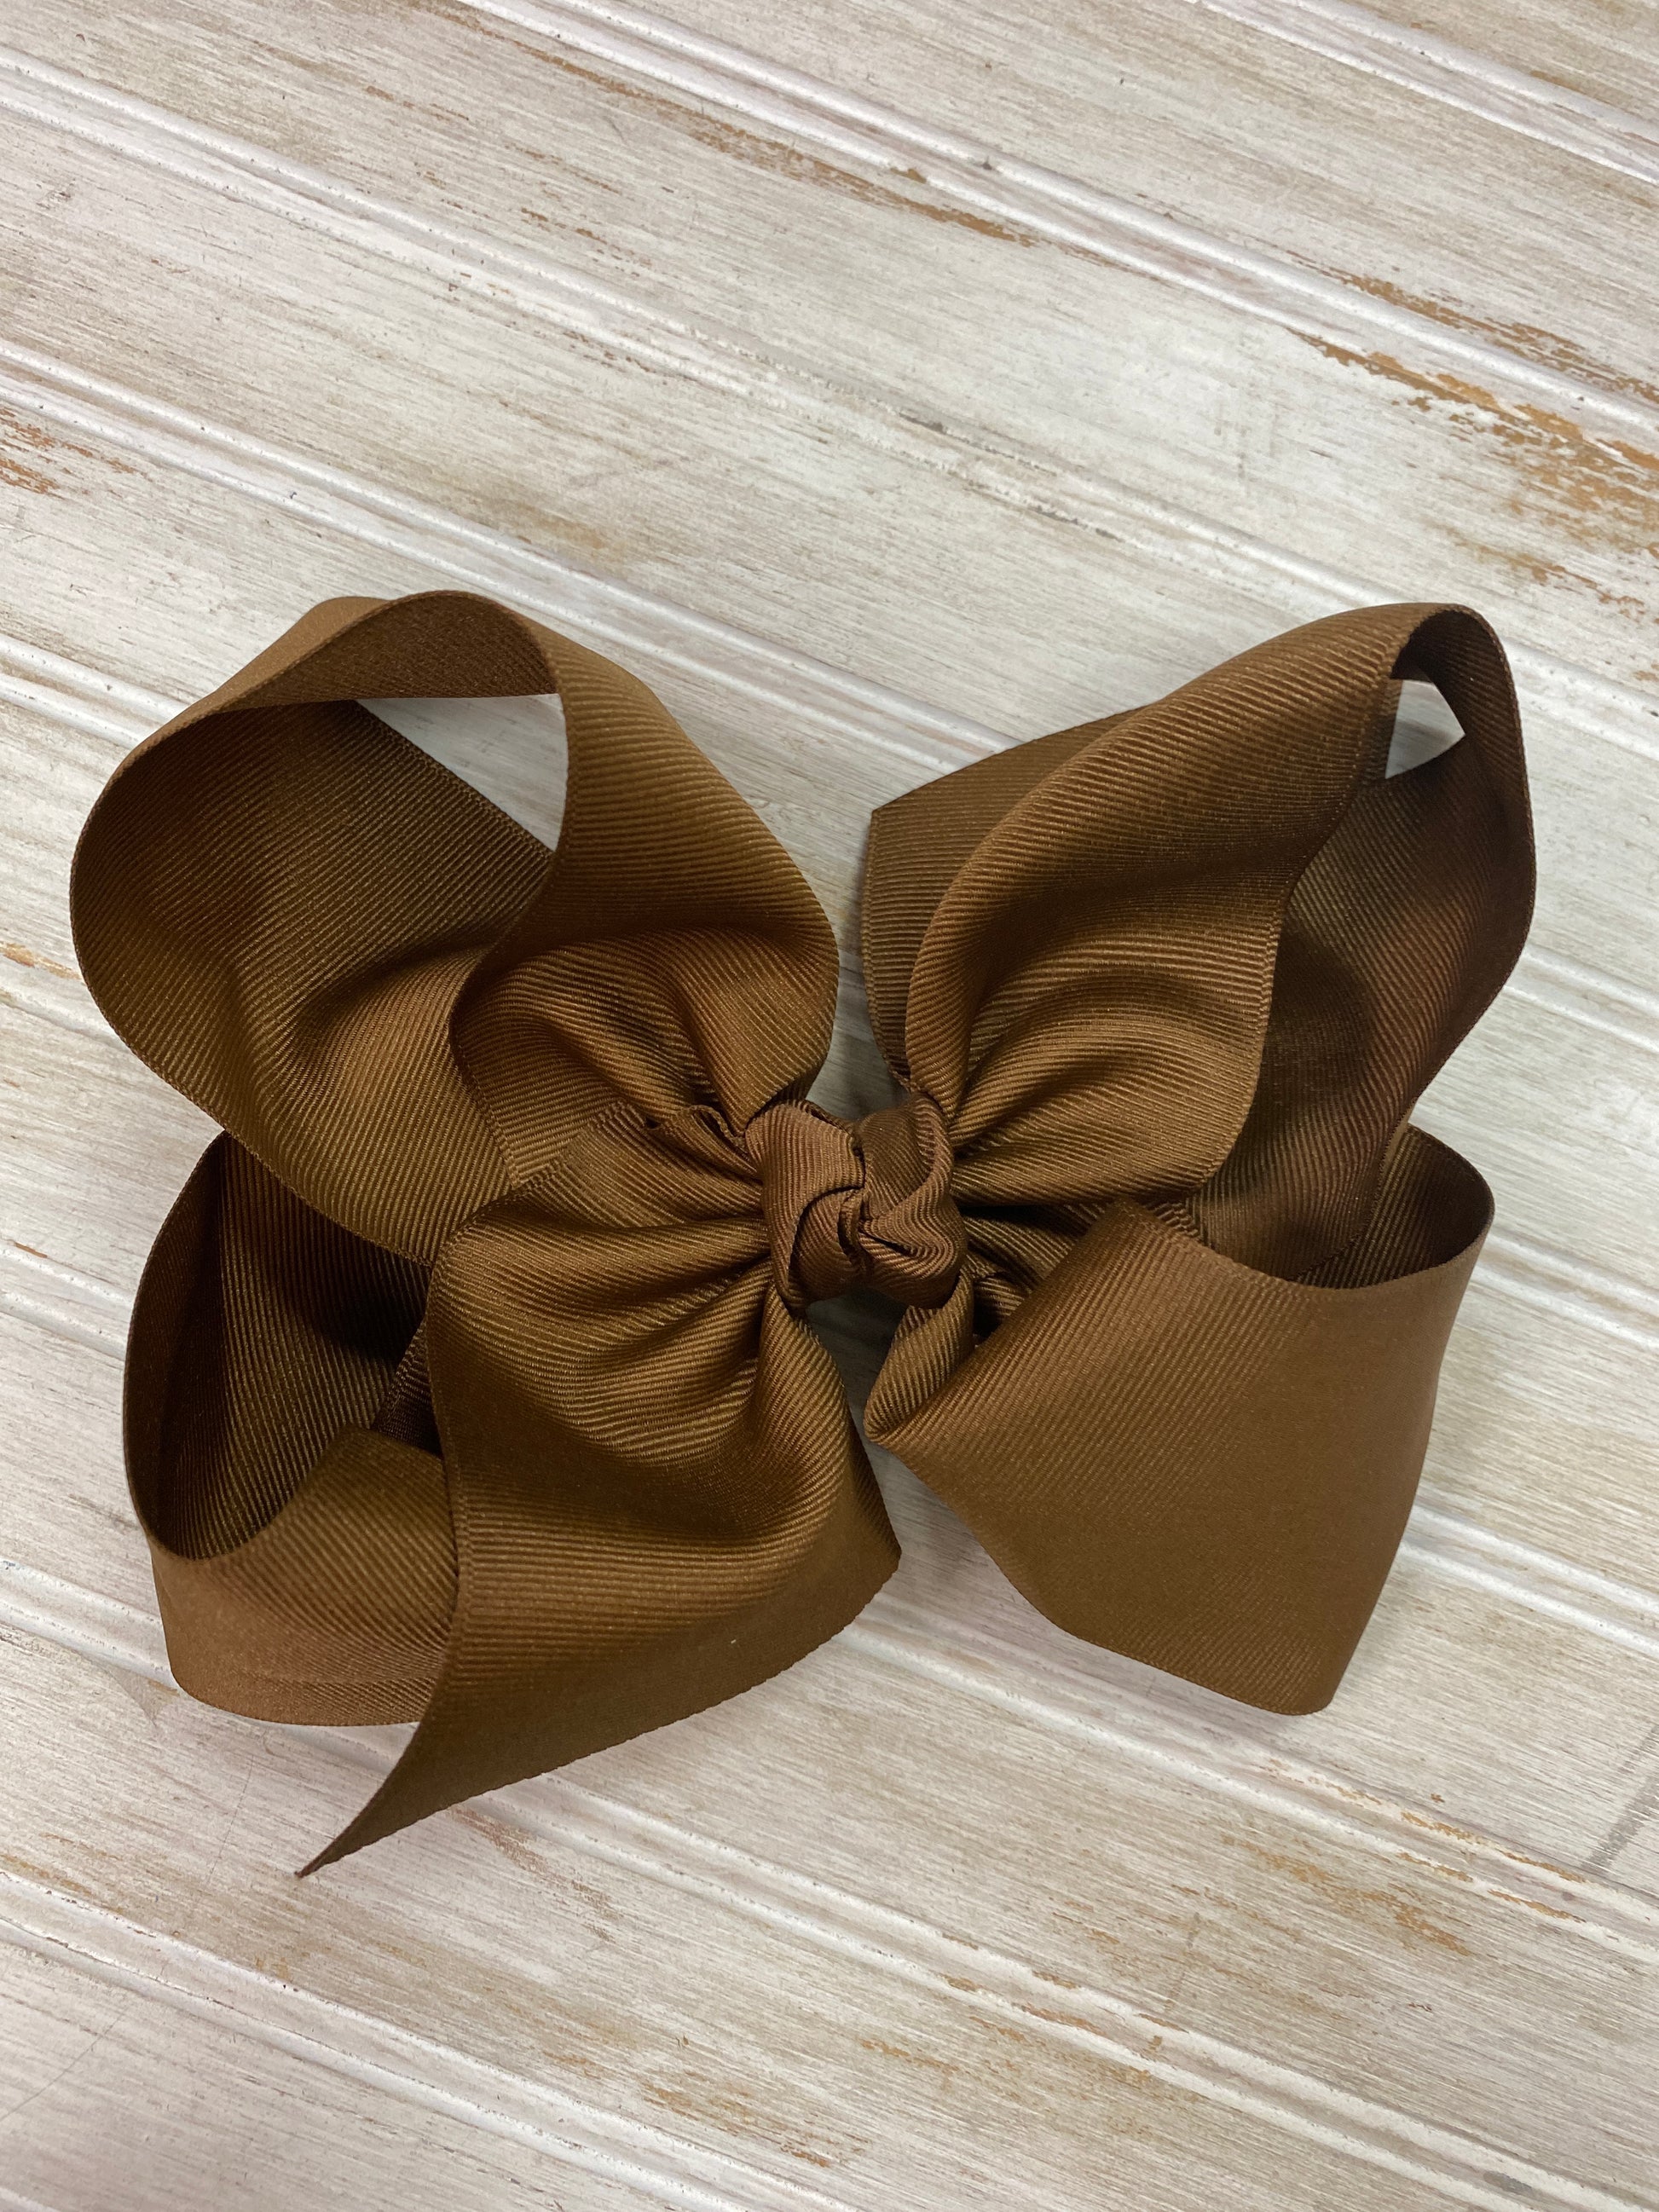 Texas Sized Bow in Camel  - Doodlebug's Children's Boutique